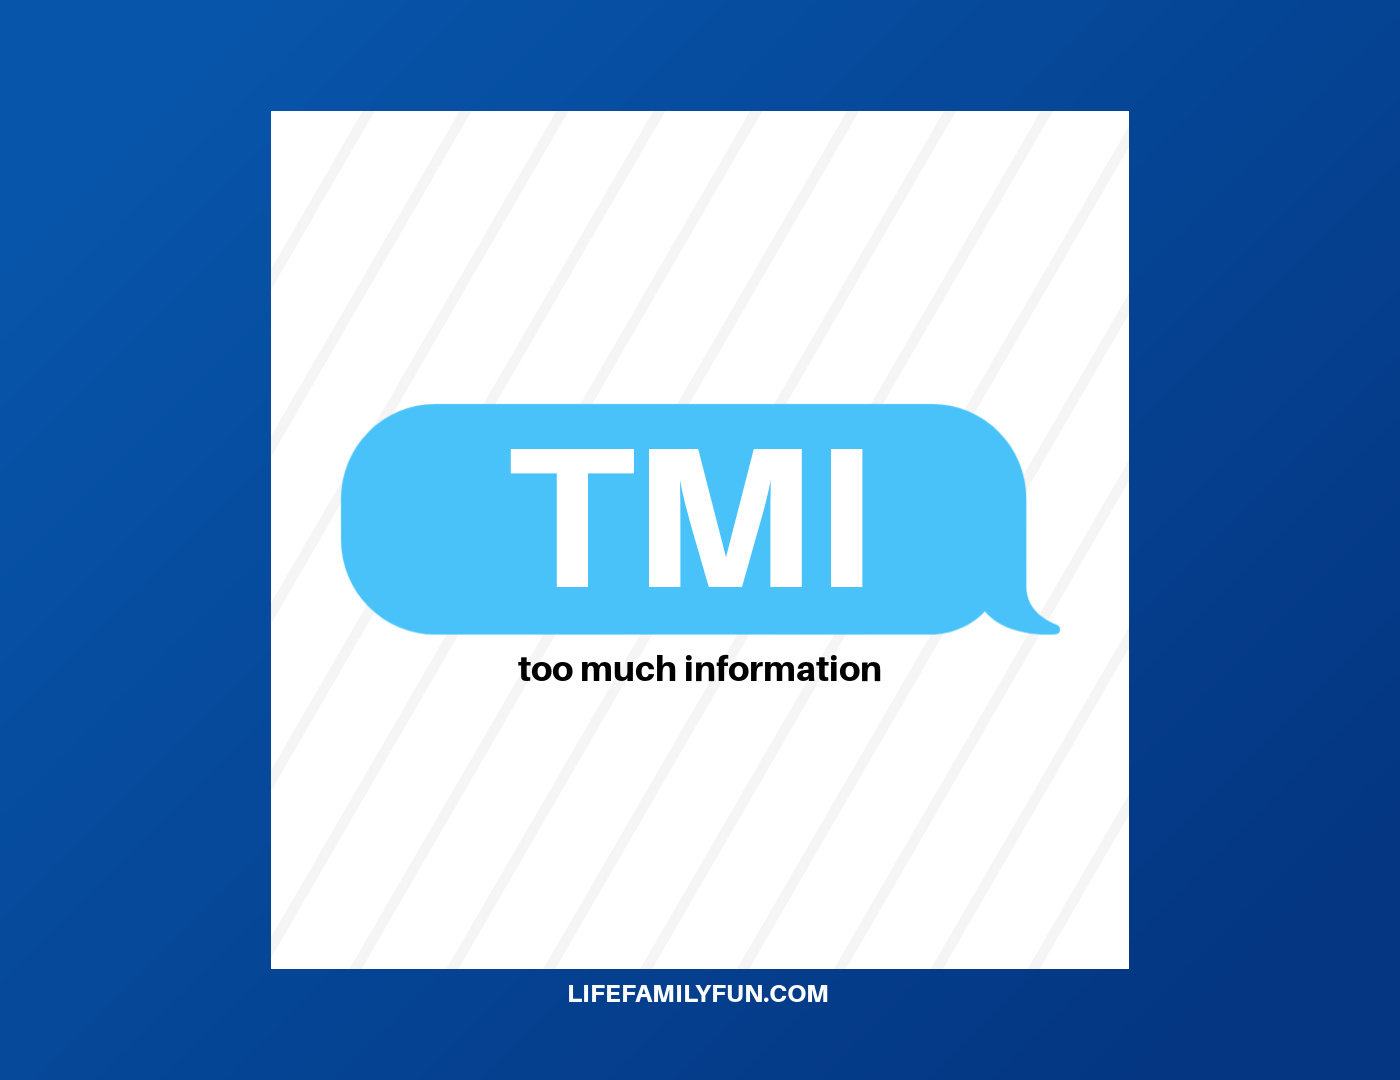 What Does TMI Mean?